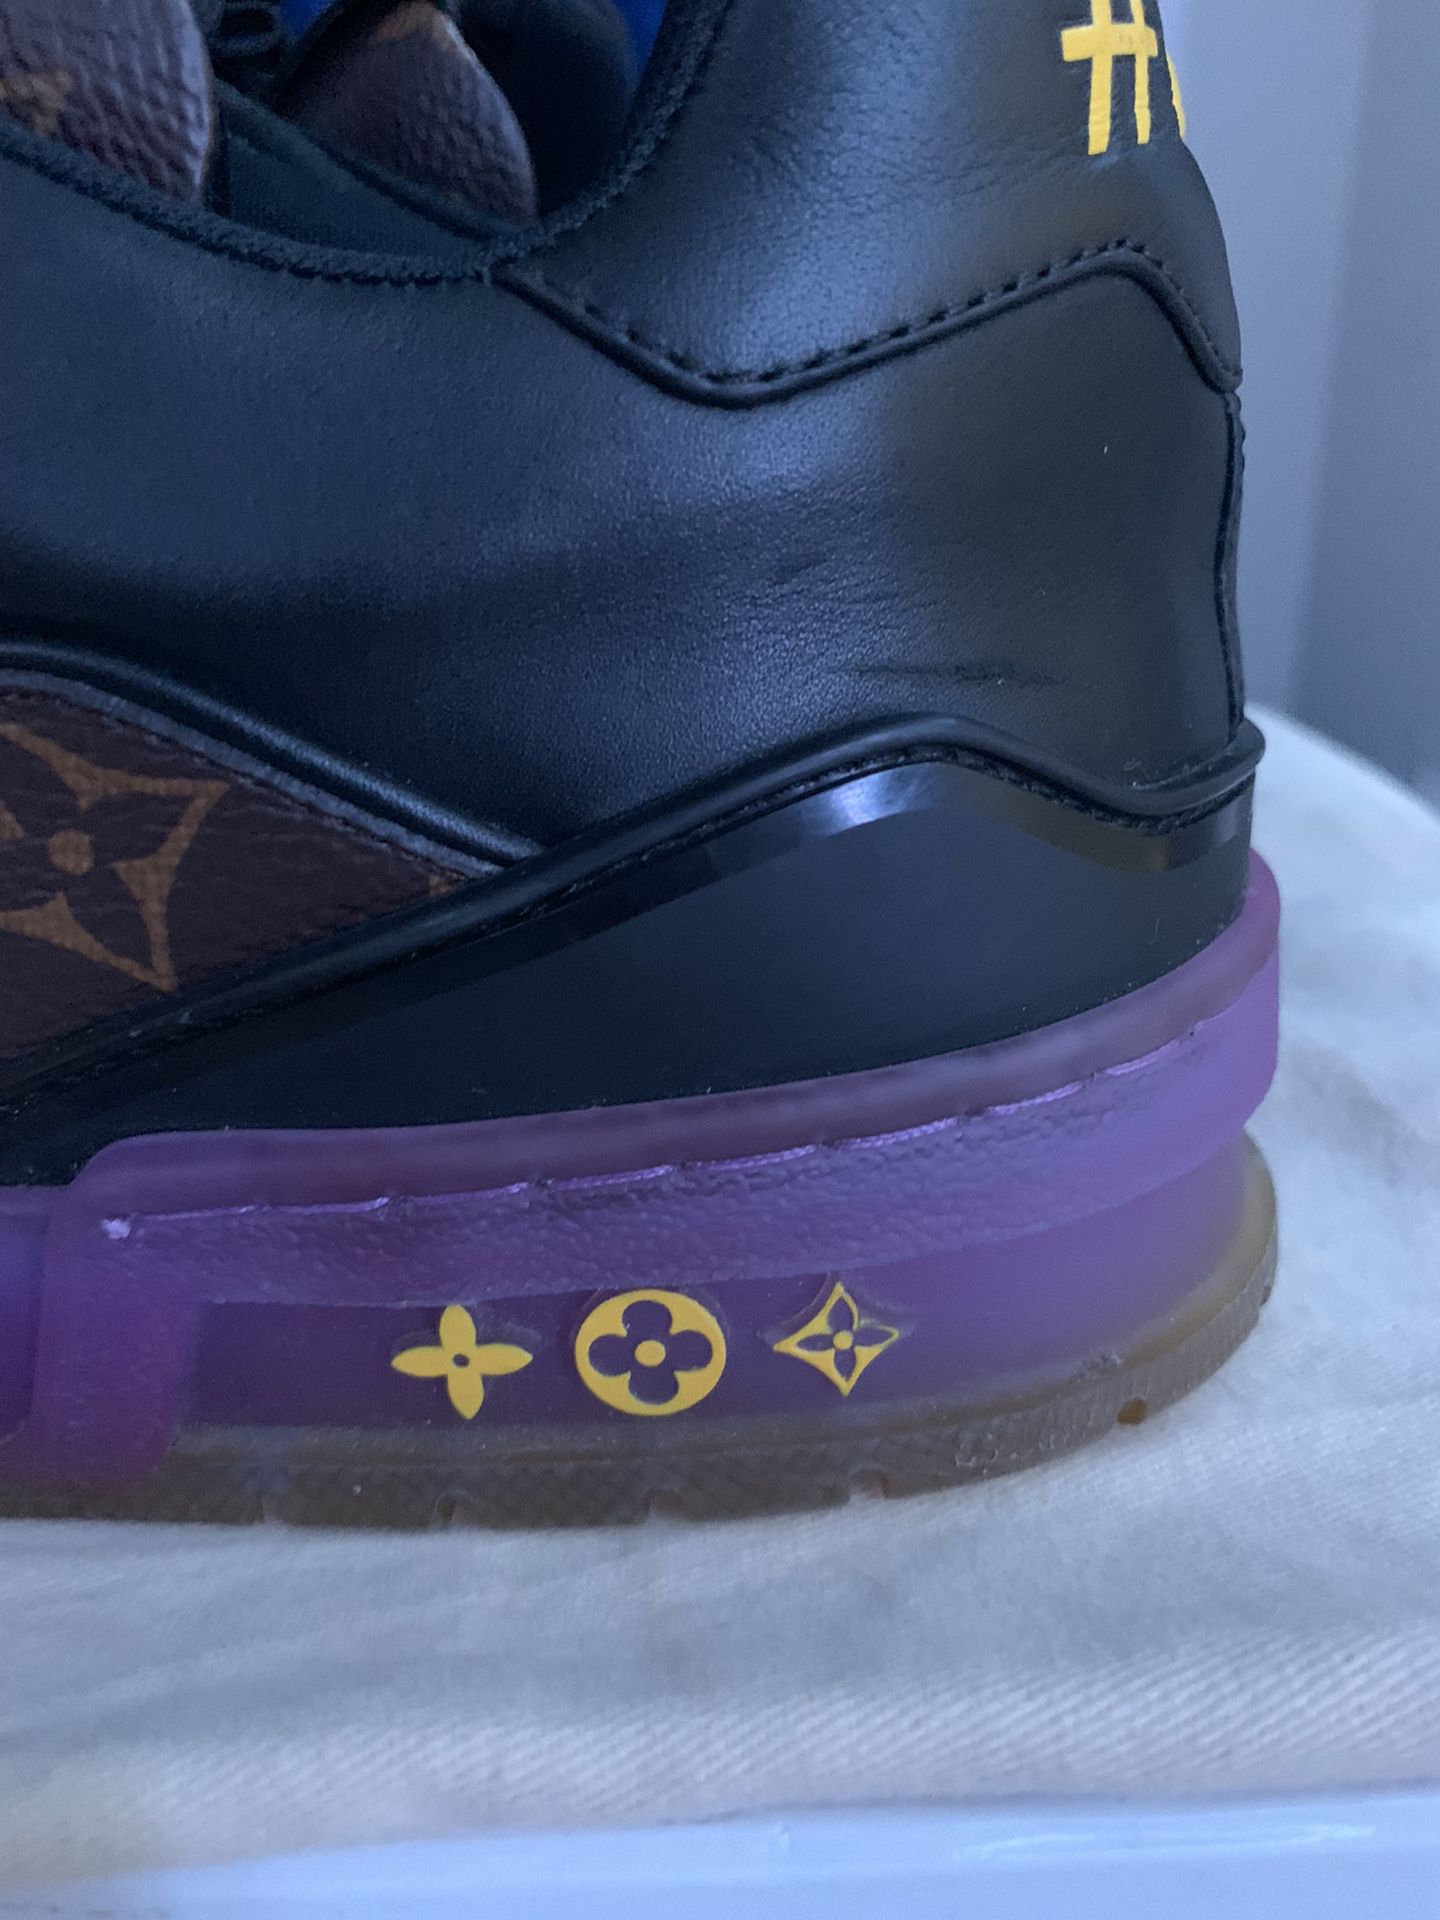 Louis Vuitton LV Trainer purple And Yellow for Sale in Glenarden